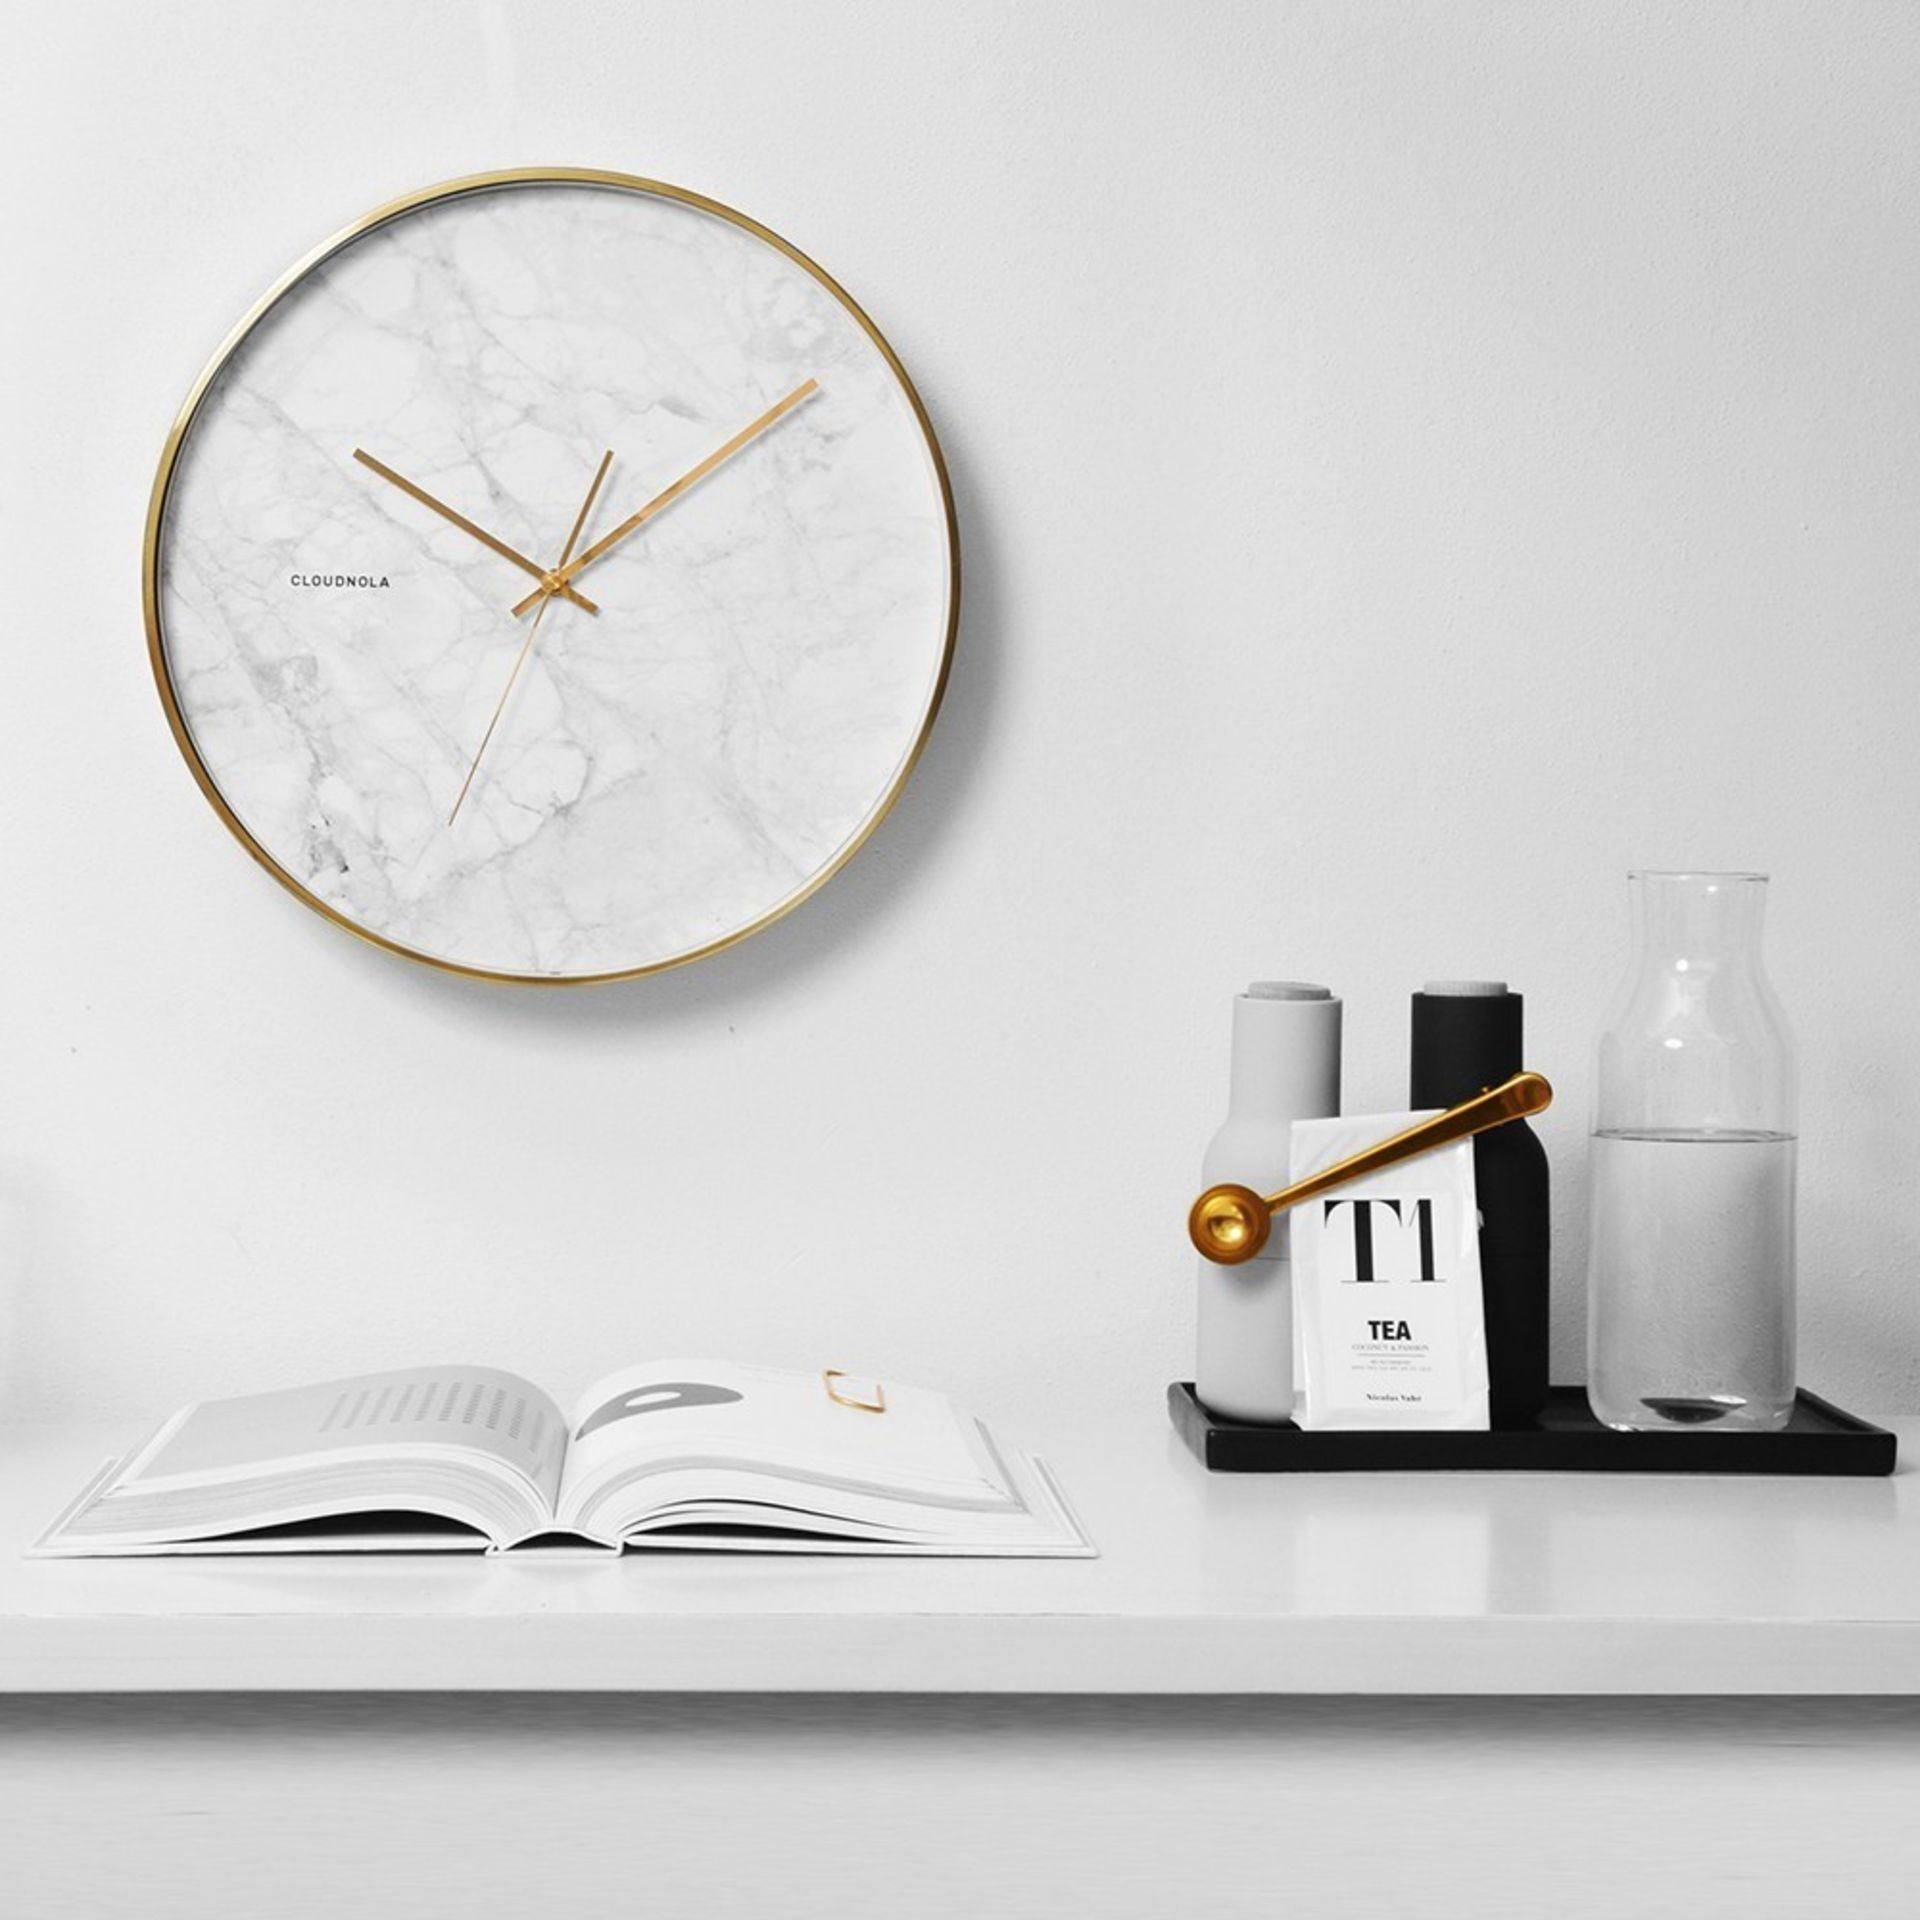 1 x 'Structure' Faux Marble Wall Clock by Cloudnola - Diameter 40cm / Projection 9cm - Brand New - Image 2 of 4